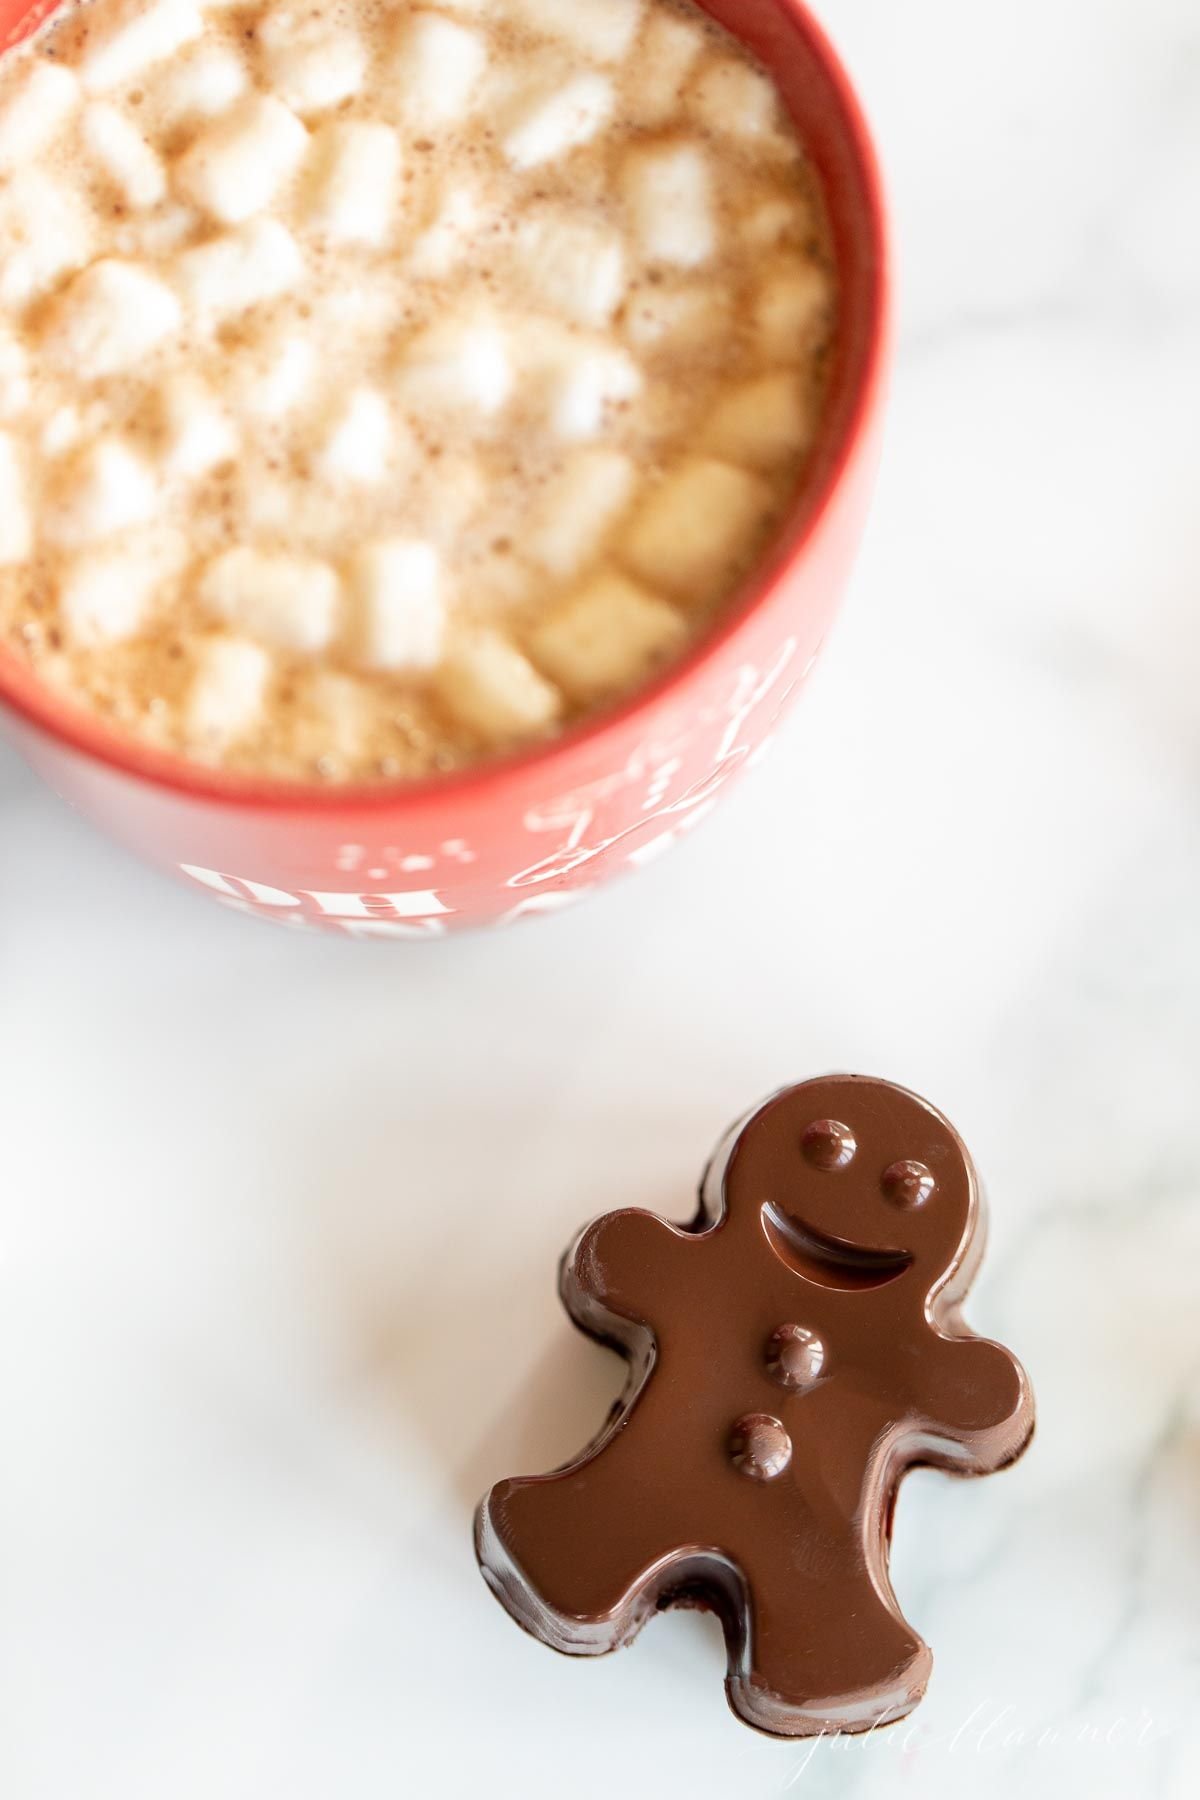 A red mug full of dark hot chocolate with marshmallows, with a dark chocolate gingerbread man to the side.